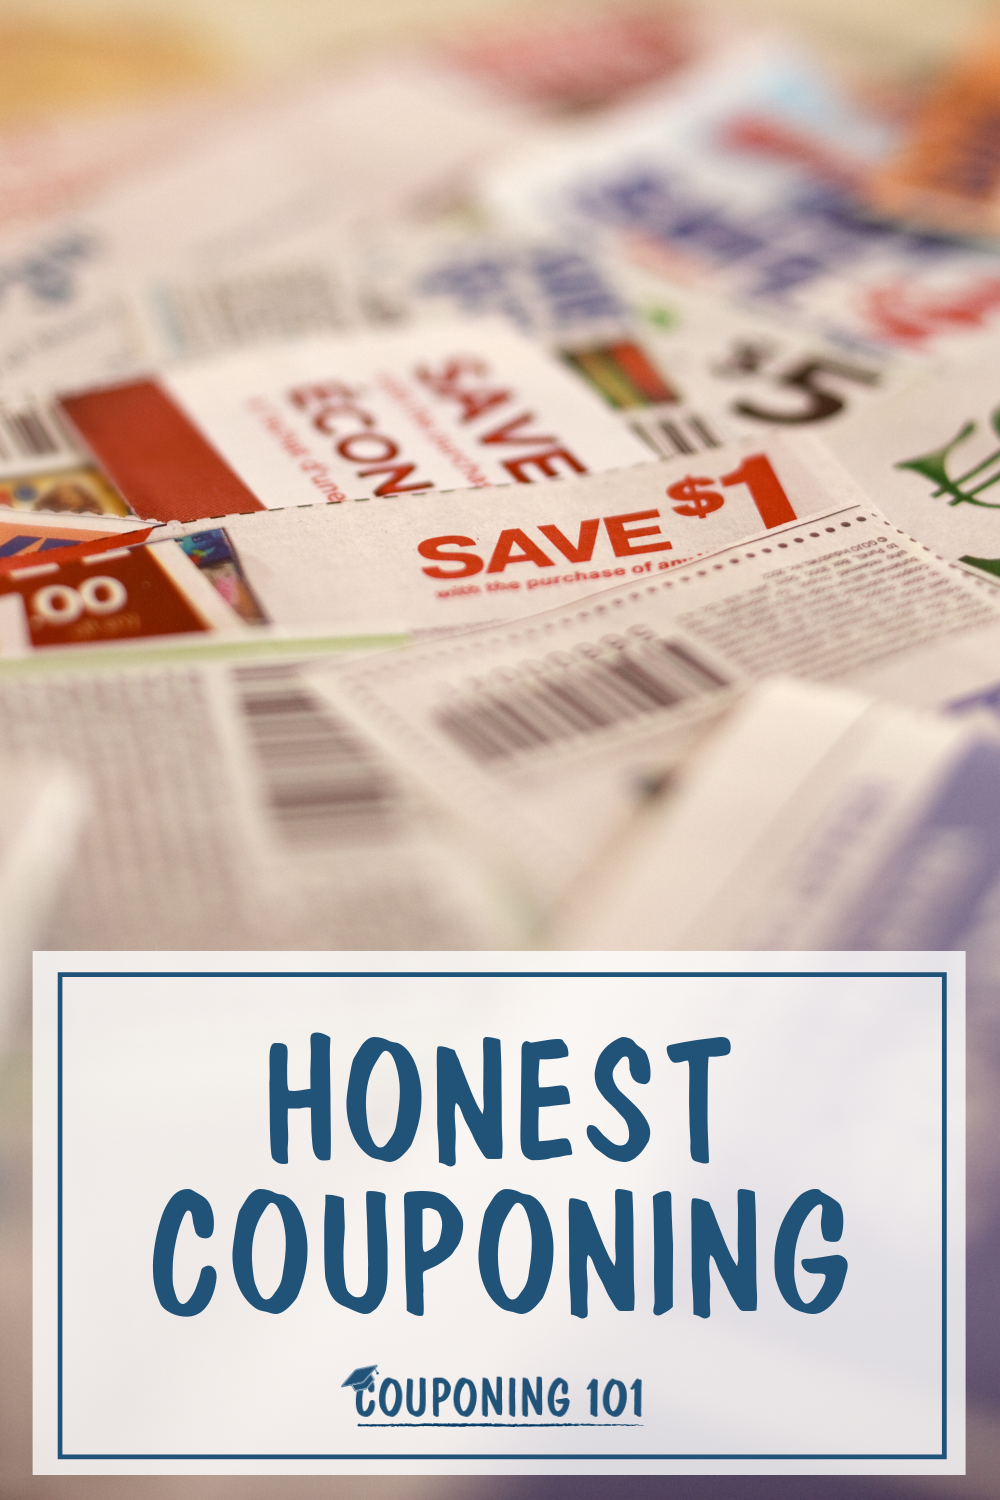 Is Honest Couponing Necessary? Couponing 101